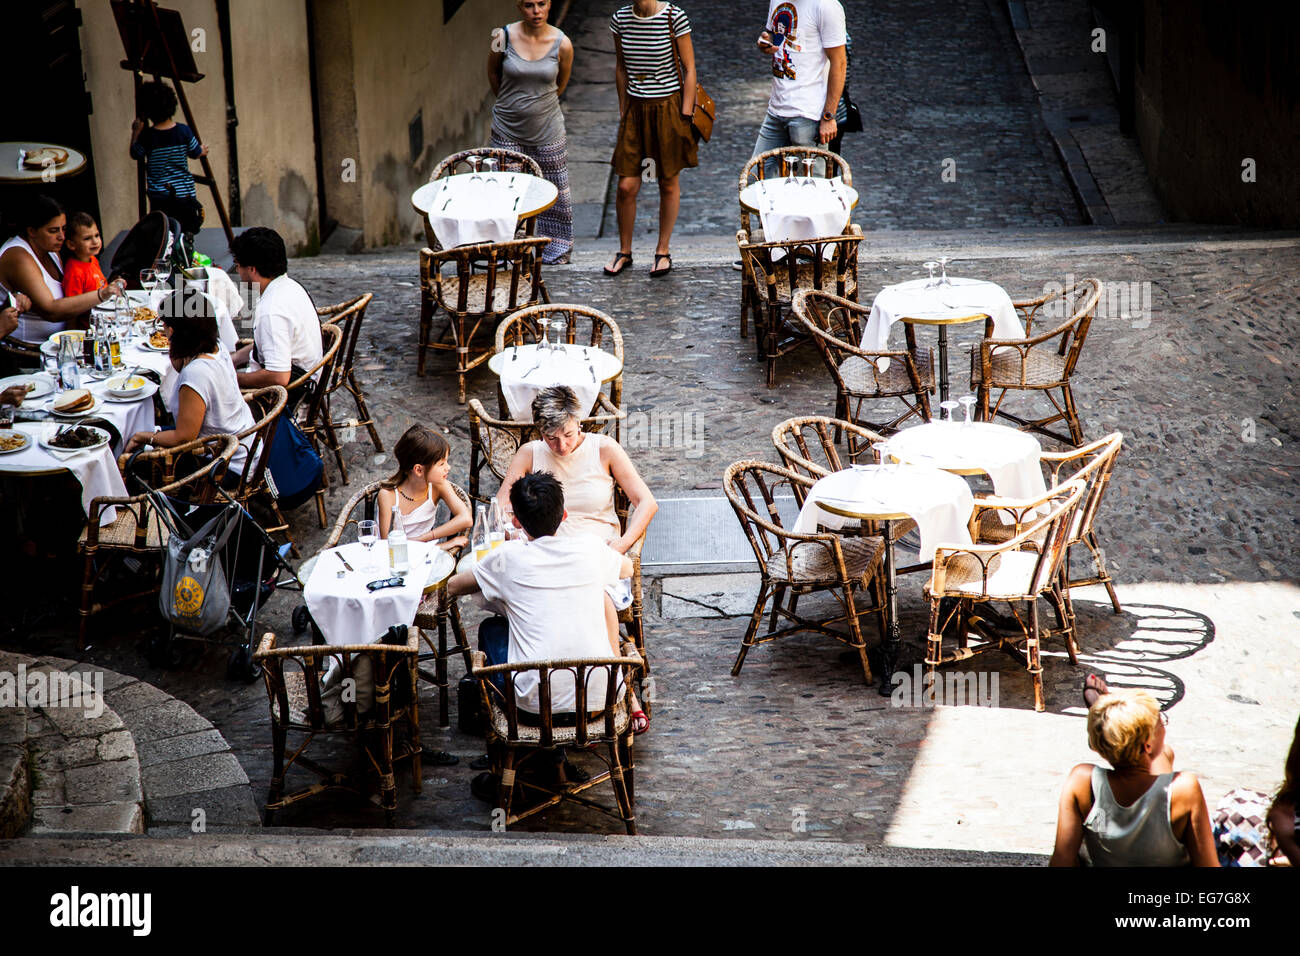 People having lunch at Girona Spain Stock Photo